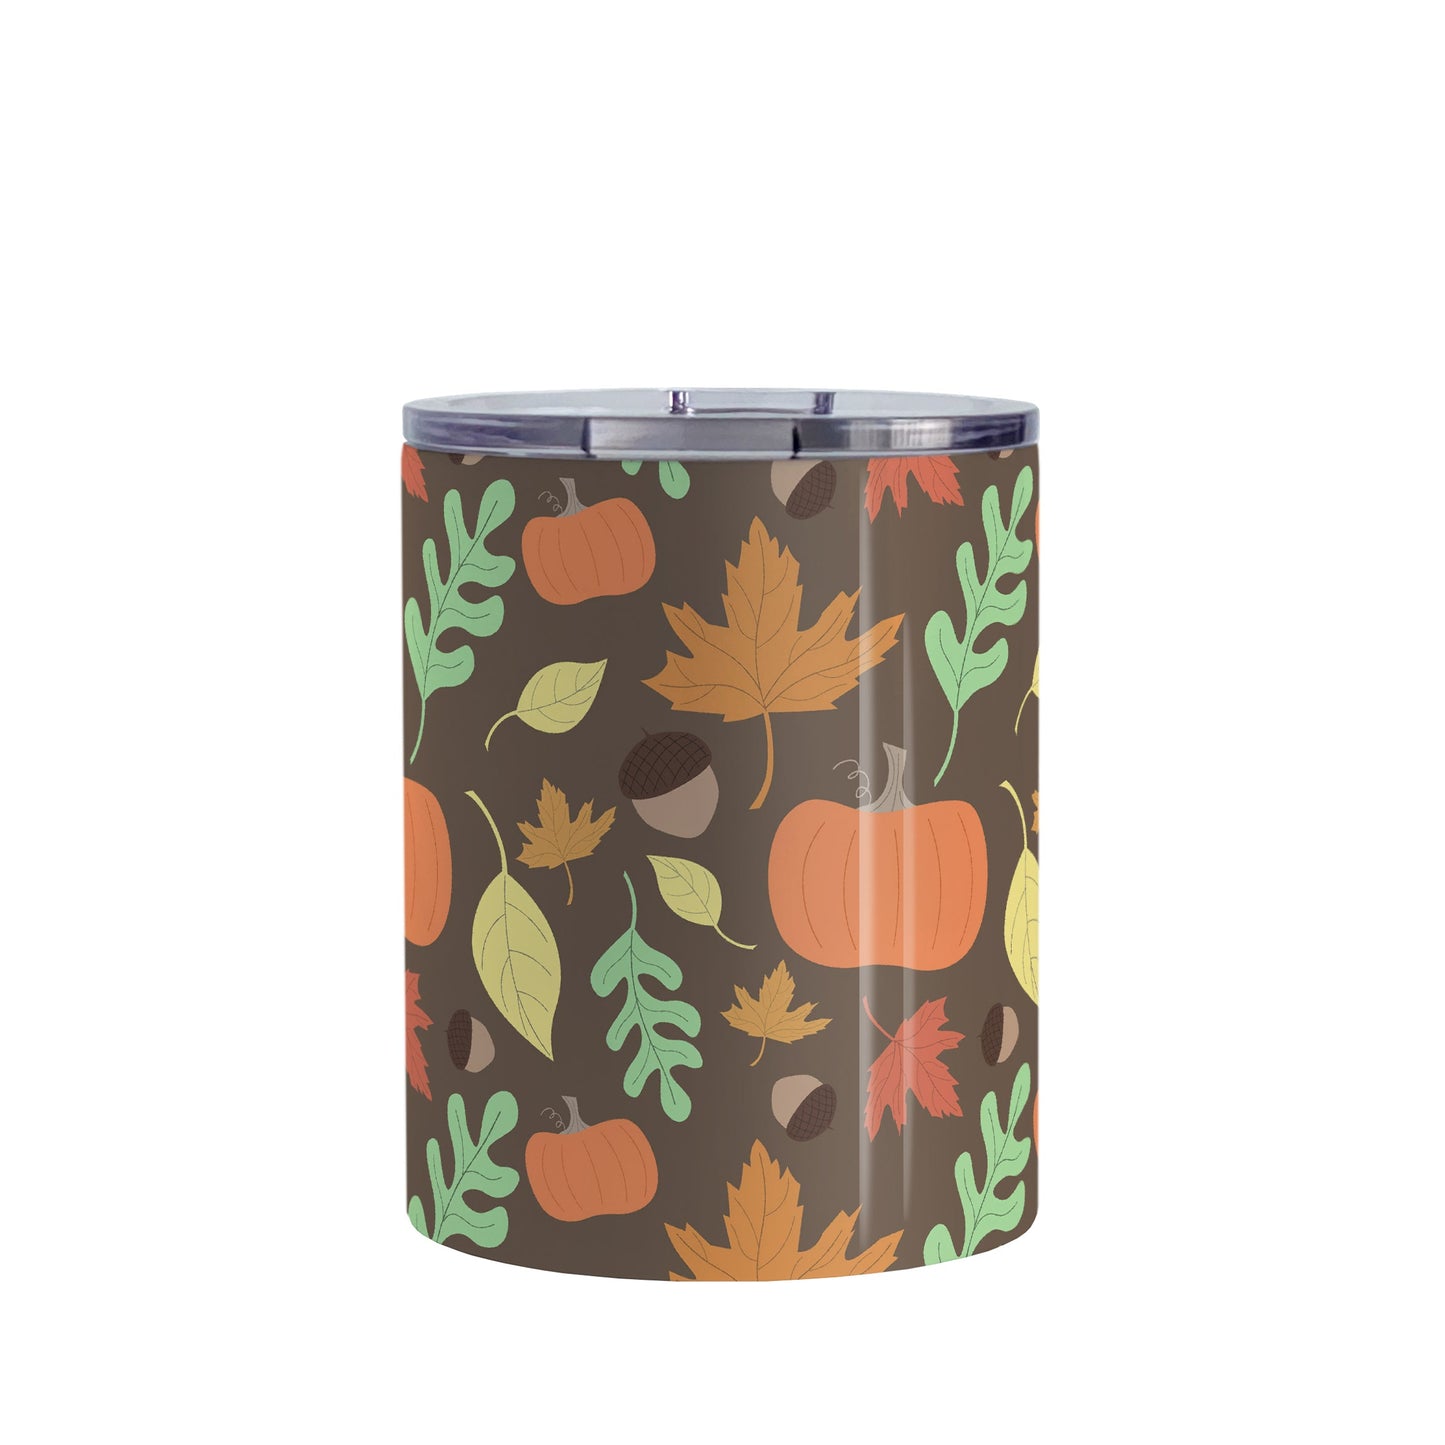 Autumn Pumpkins and Leaves Pattern - Fall Tumbler Cup (10oz, stainless steel insulated) at Amy's Coffee Mugs